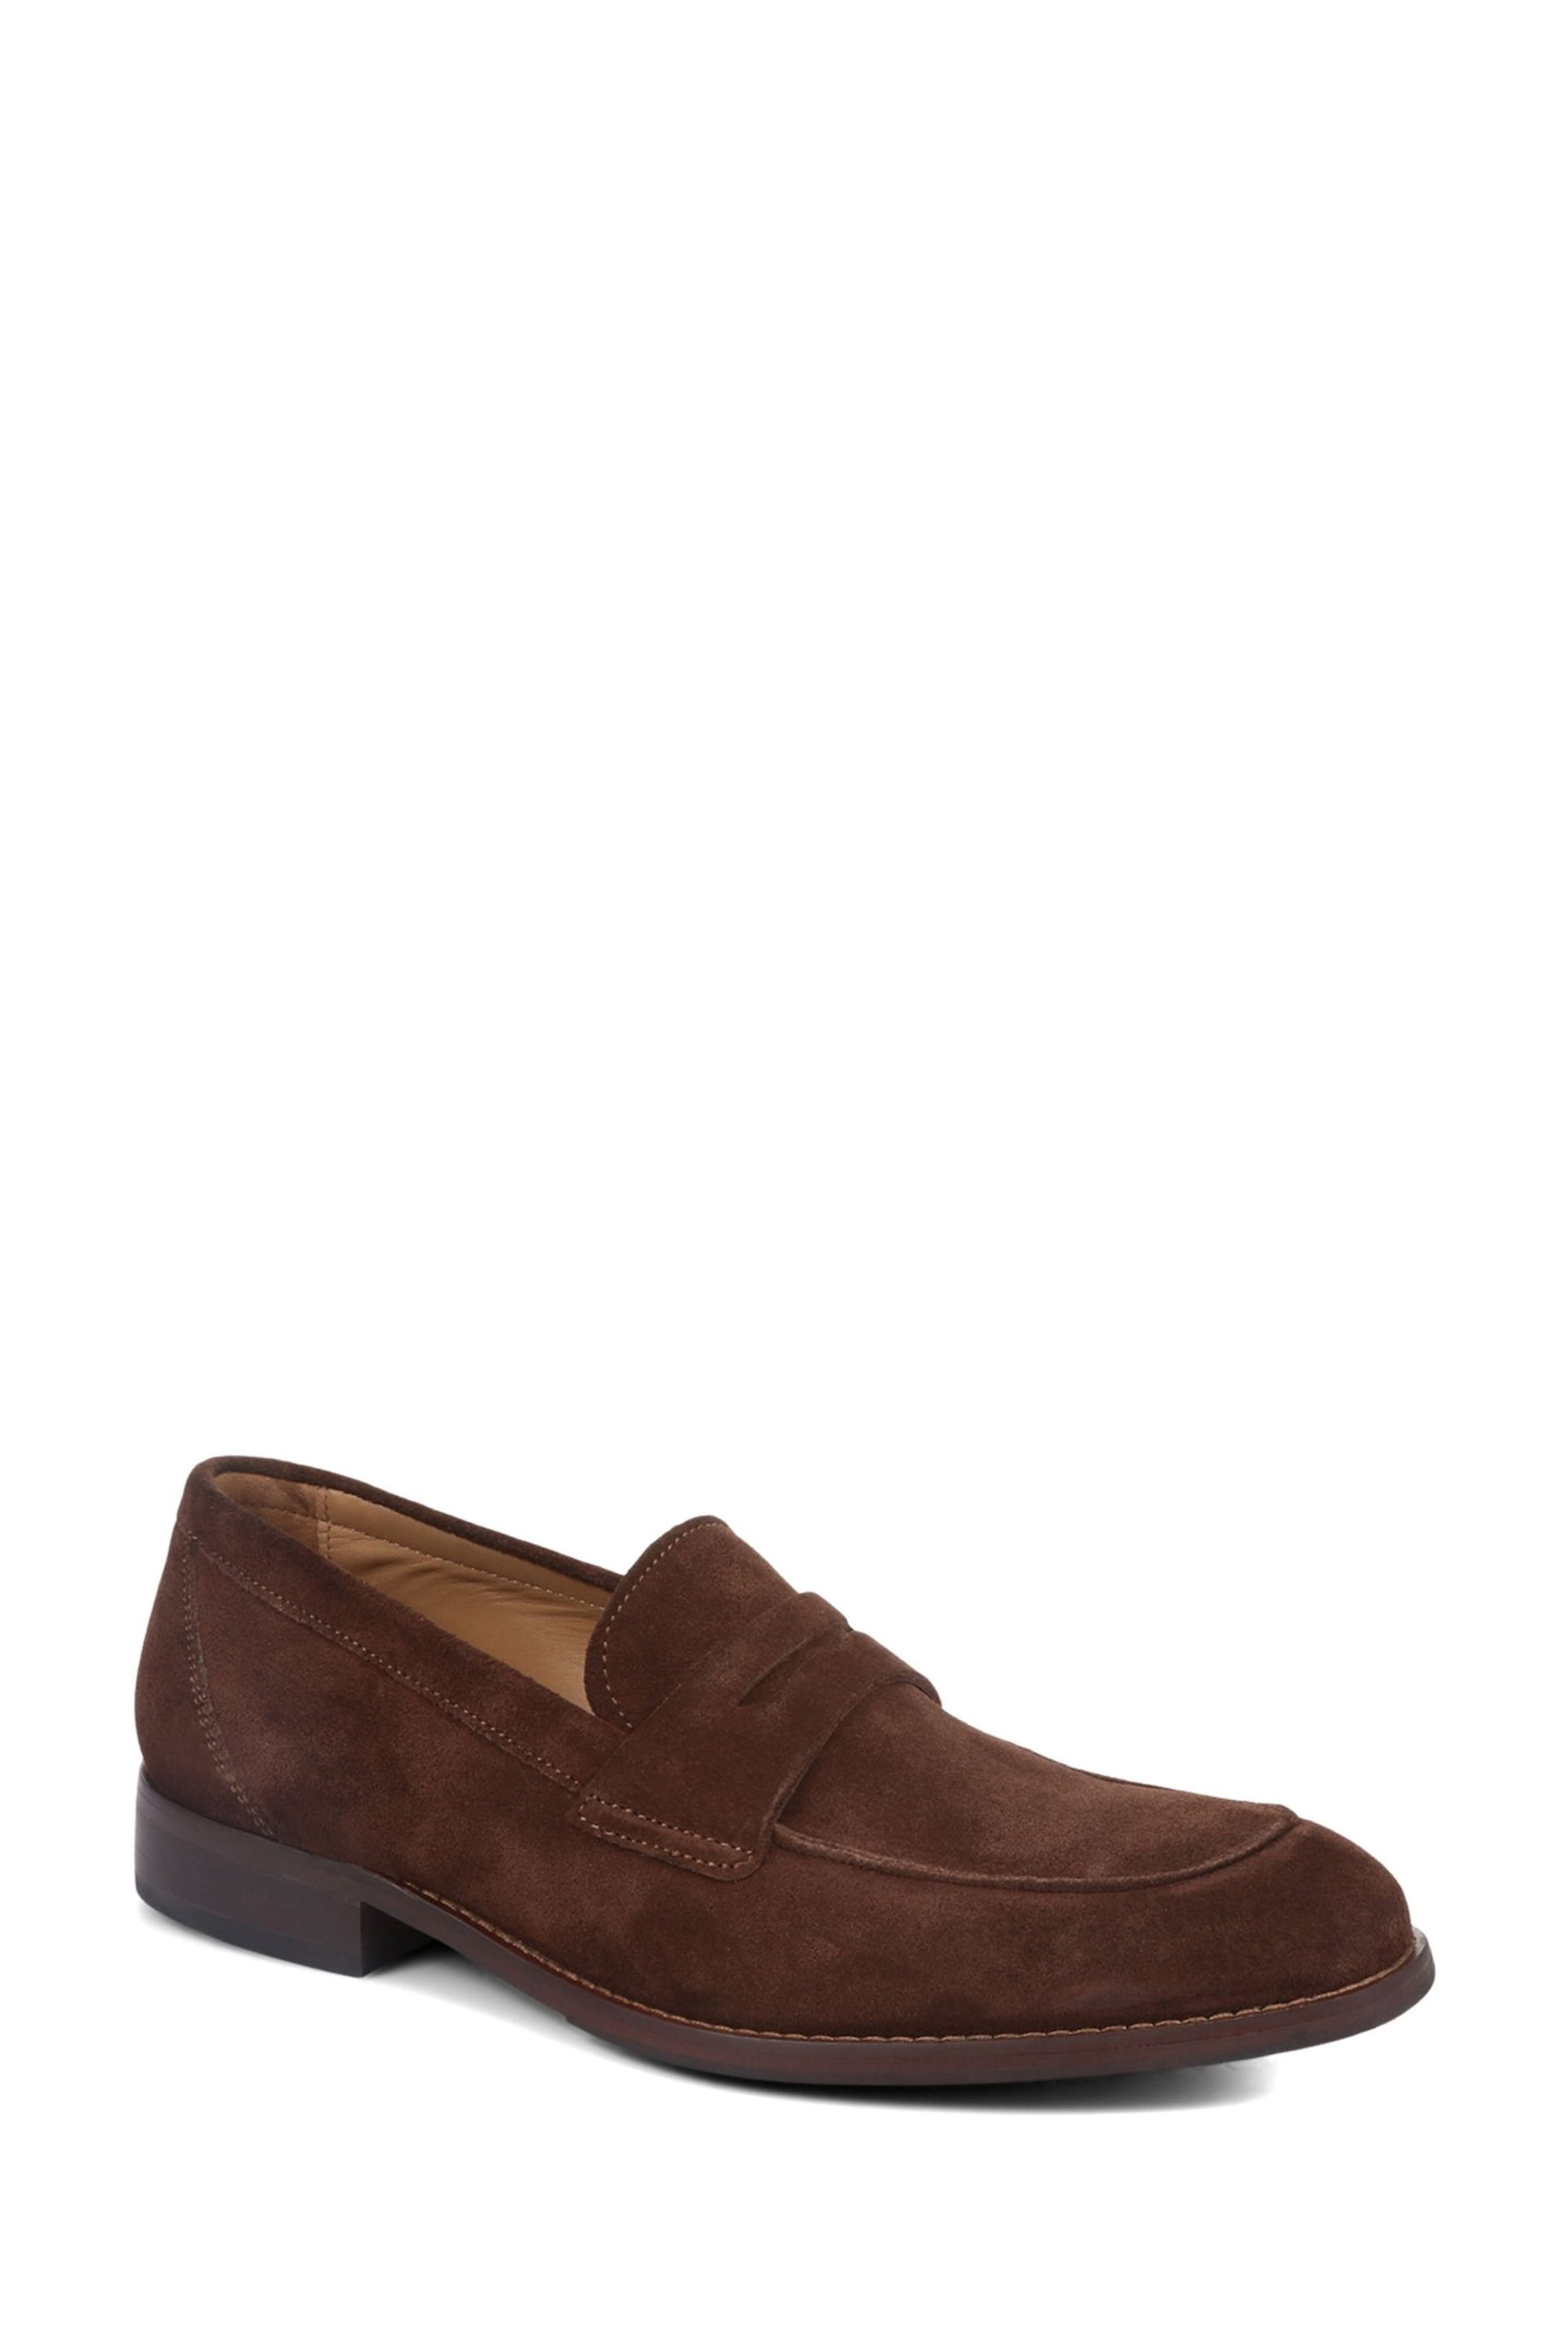 Jones Bootmaker Leather Penny Loafers - Image 4 of 7